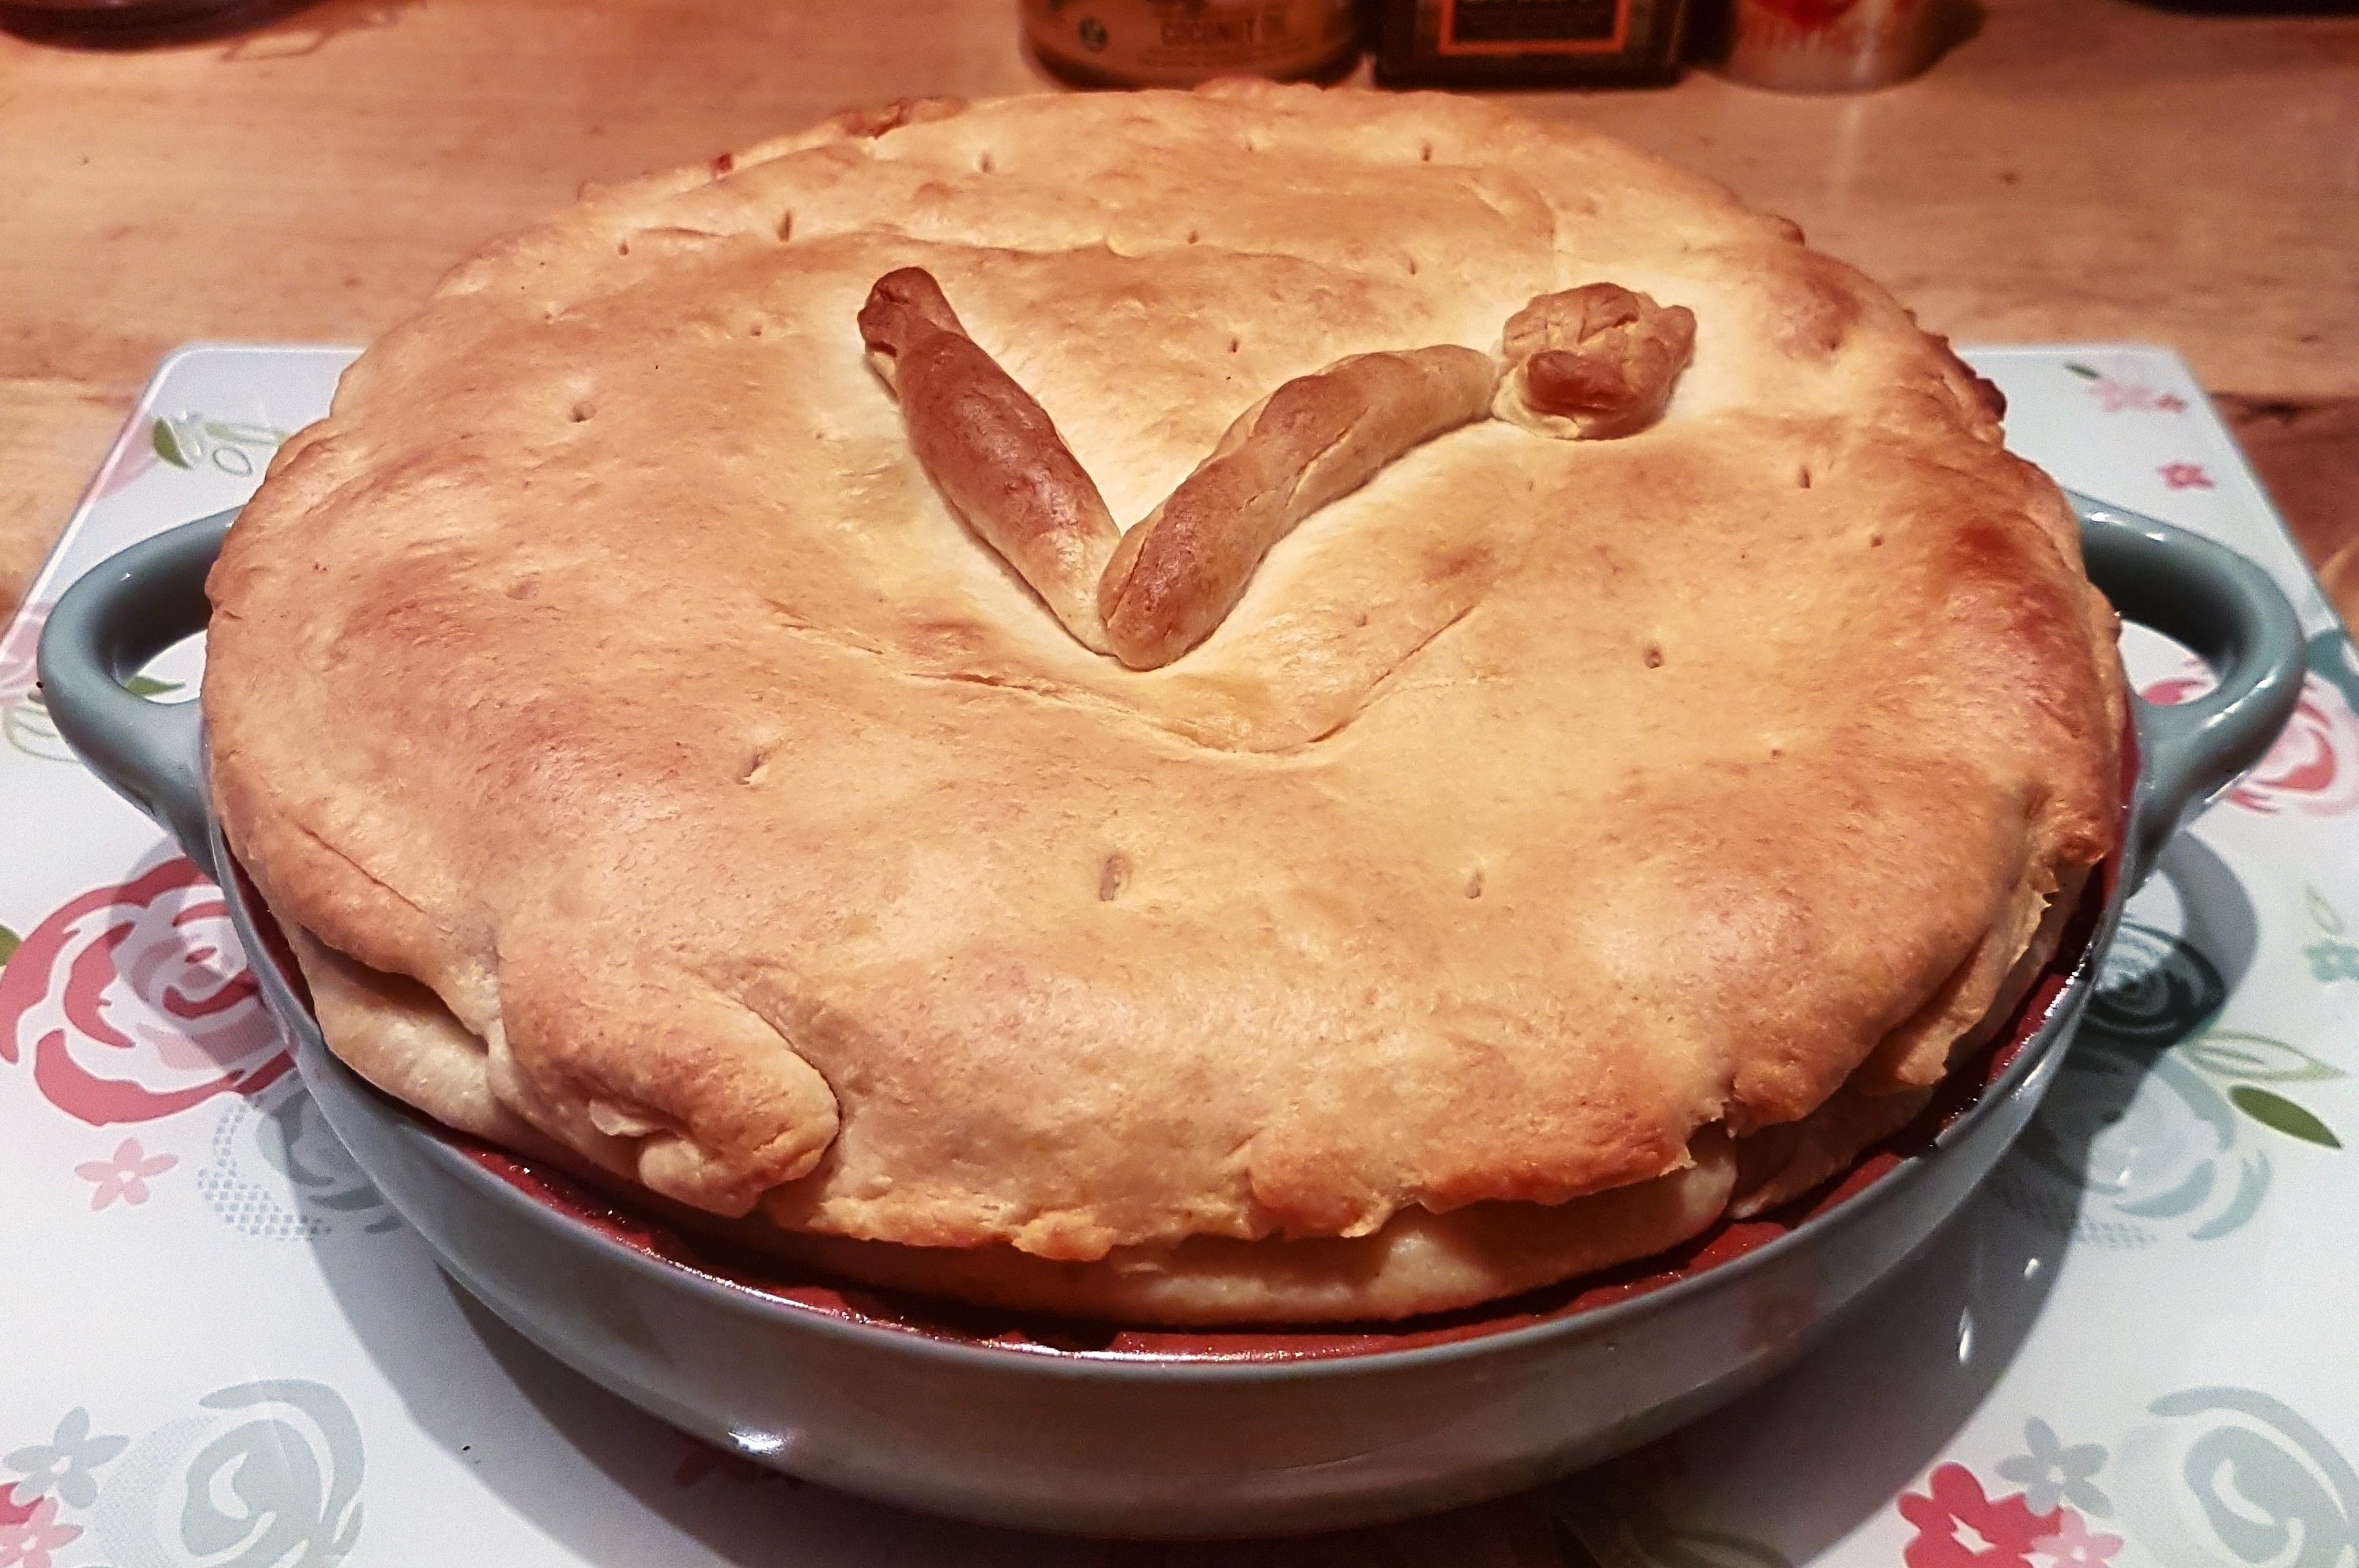 chicken and leek pie - perfect for non-vegan dinner guests